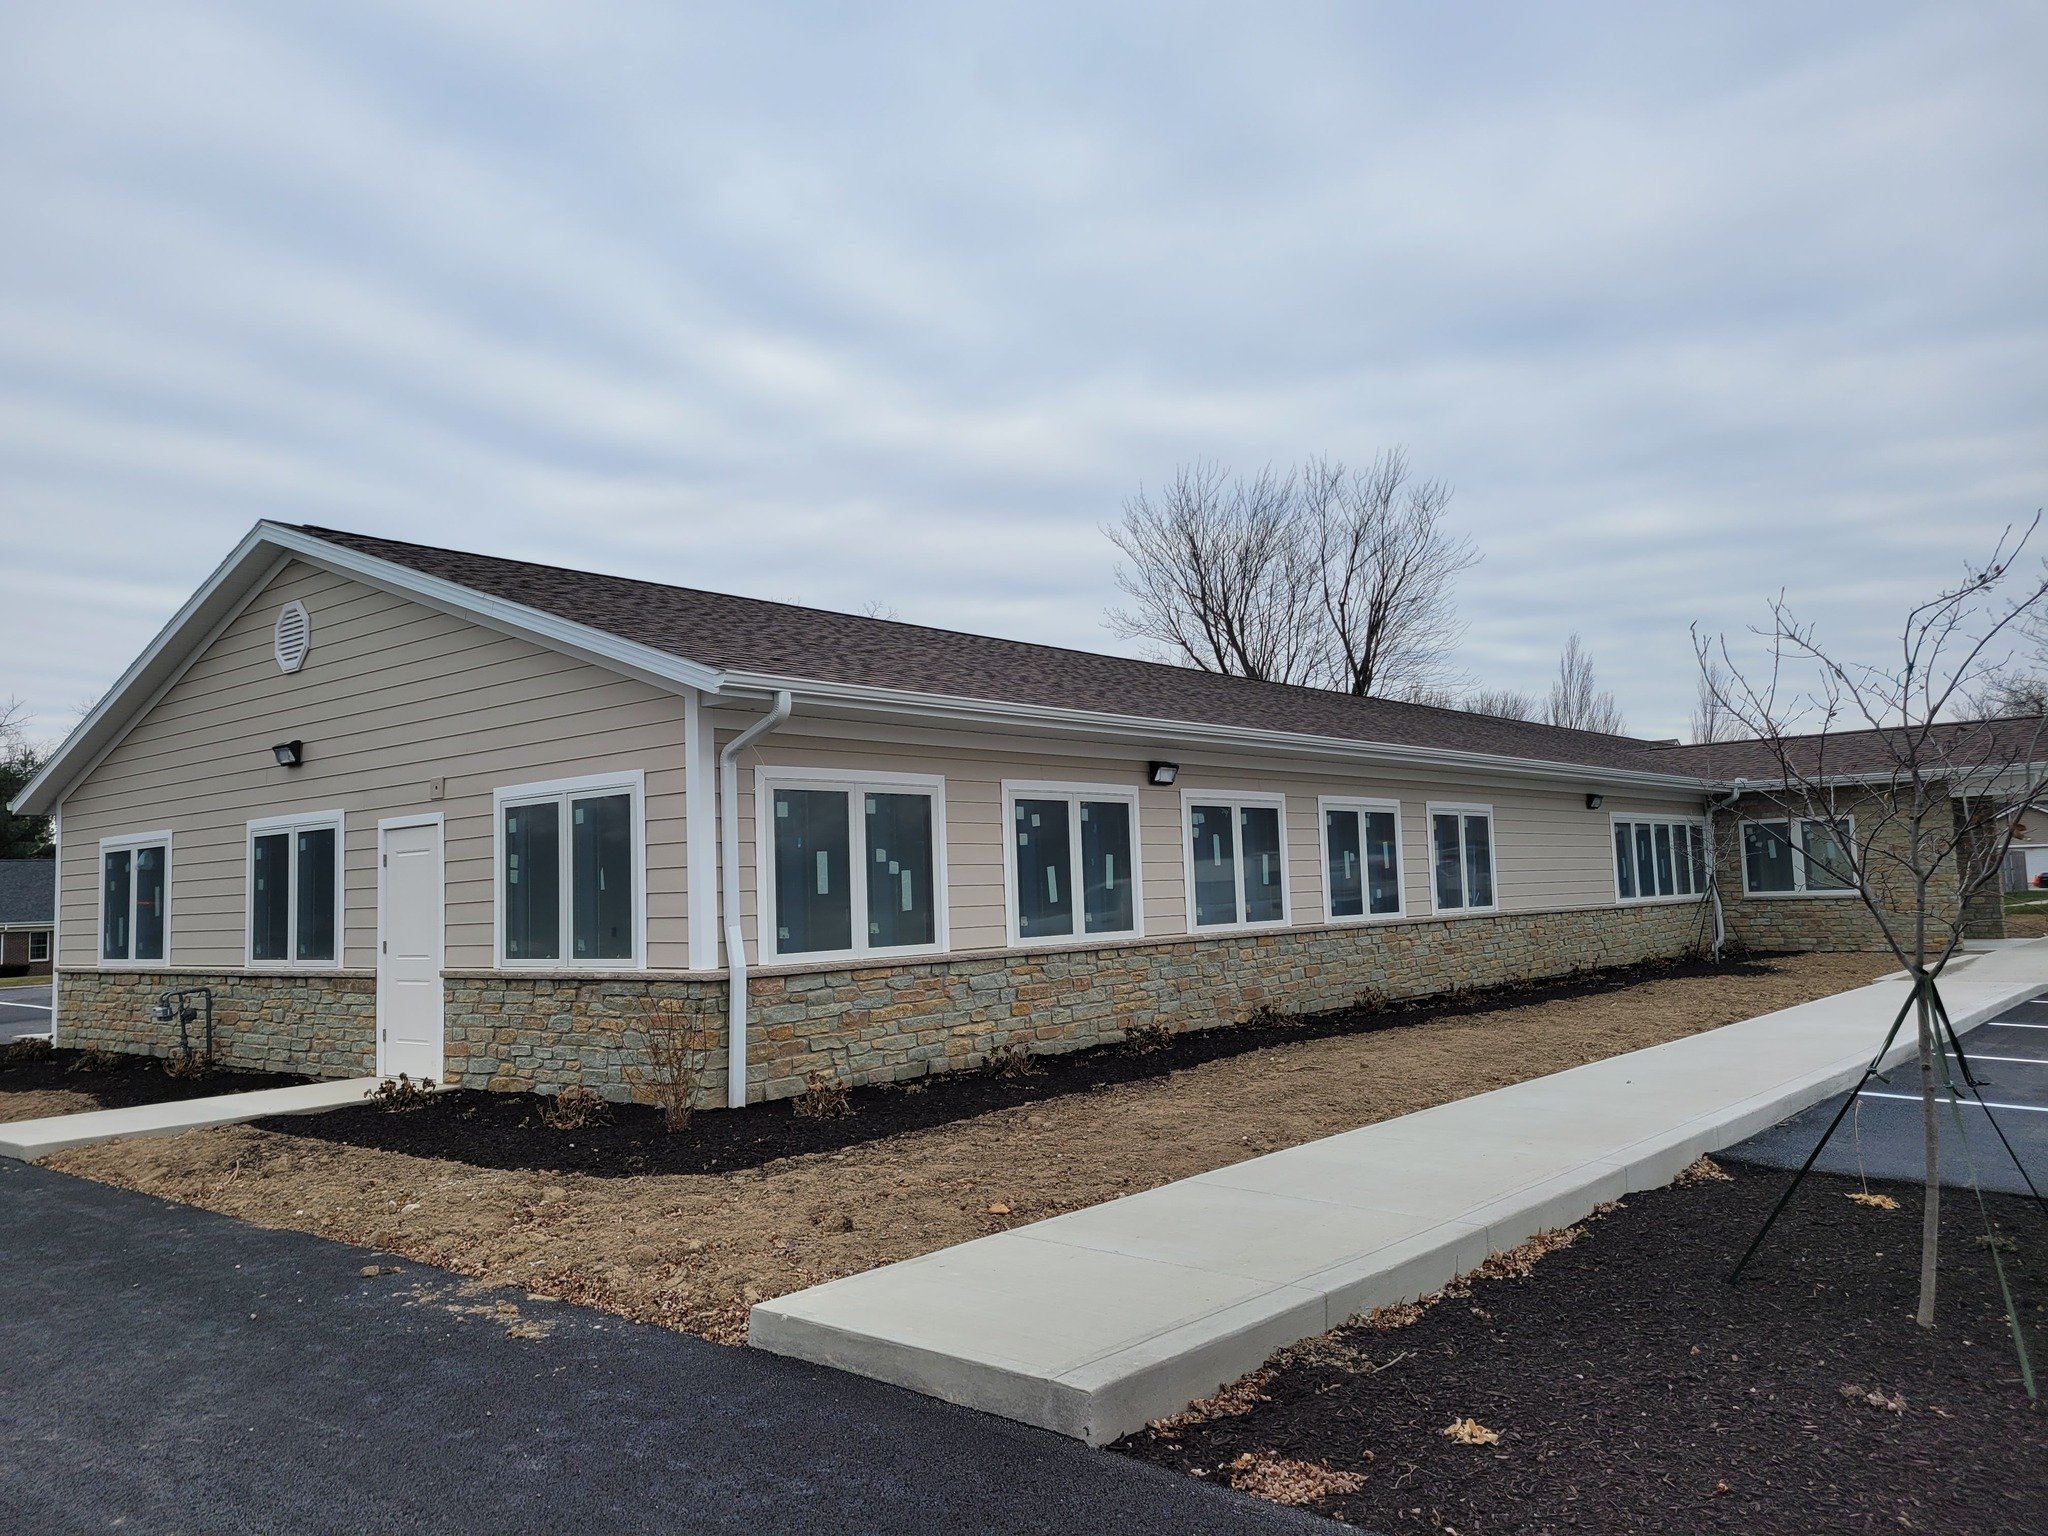 It's safe to say we're getting close to wrapping up Terra Nova Medical Clinic. The exterior, landscaping, and parking lot are fully complete and the interior is getting a fresh coat of paint and flooring put down. We can't wait get the owners all mov